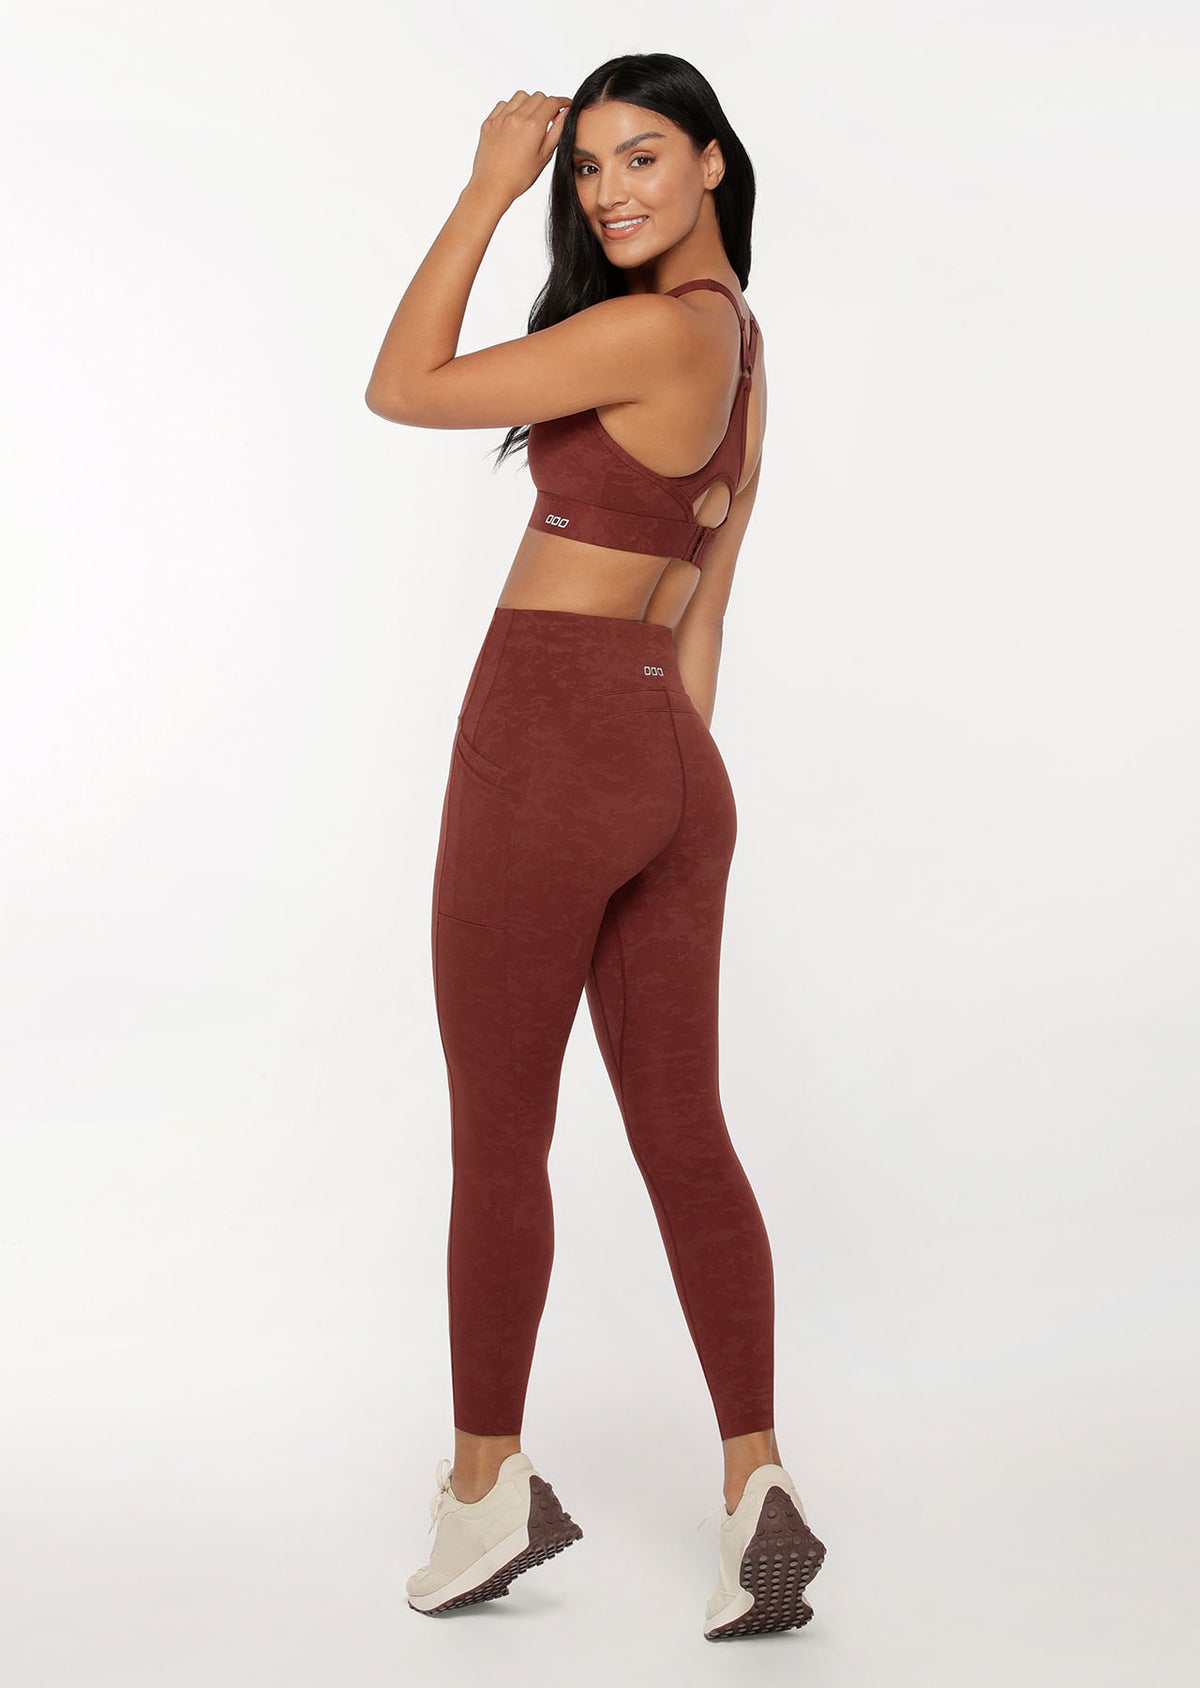 Lorna Jane No Ride Swift Ankle Biter Leggings in Washed Cool Brown